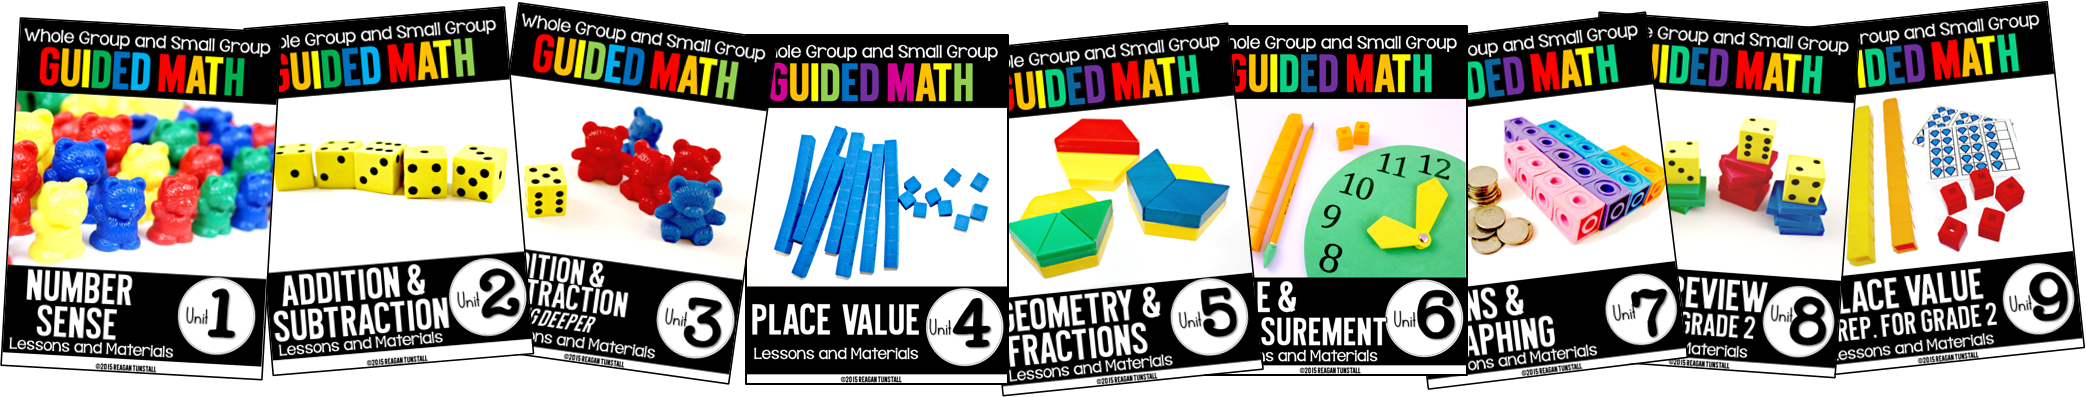 Resources to Teach Guided Math